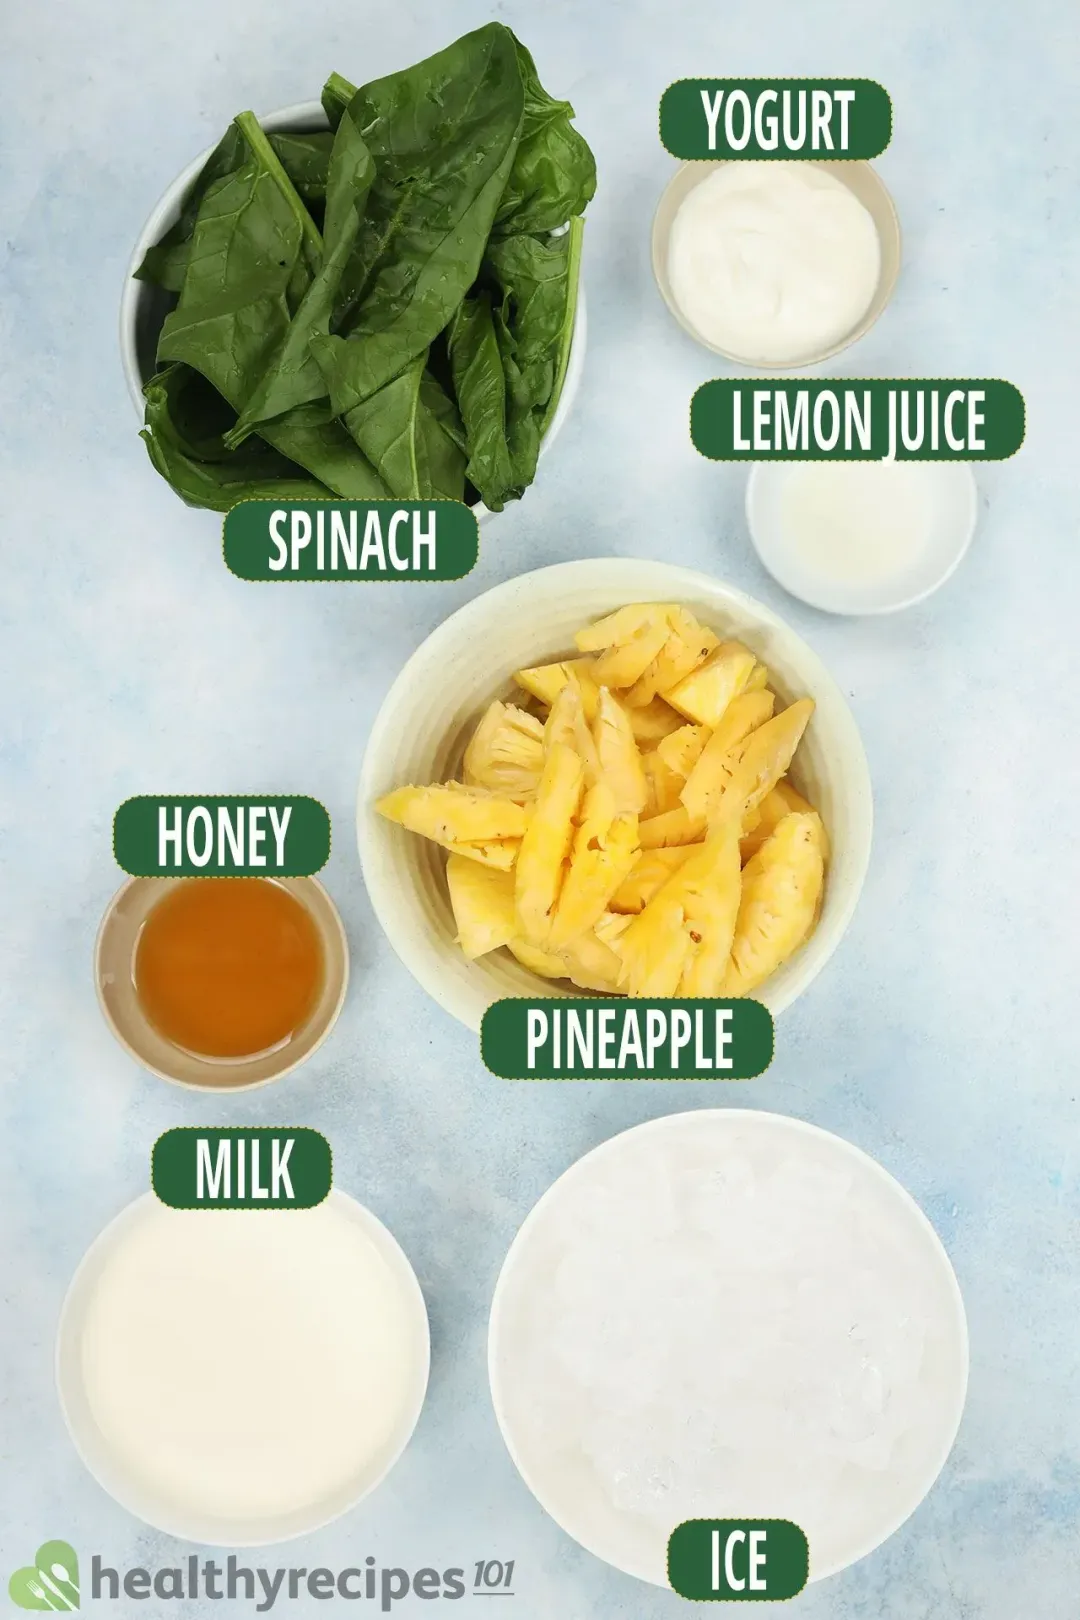 Ingredients: Spinach, yogurt, lemon juice, honey, chunks of pineapple, milk, and ice nuggets, all put in separate bowls